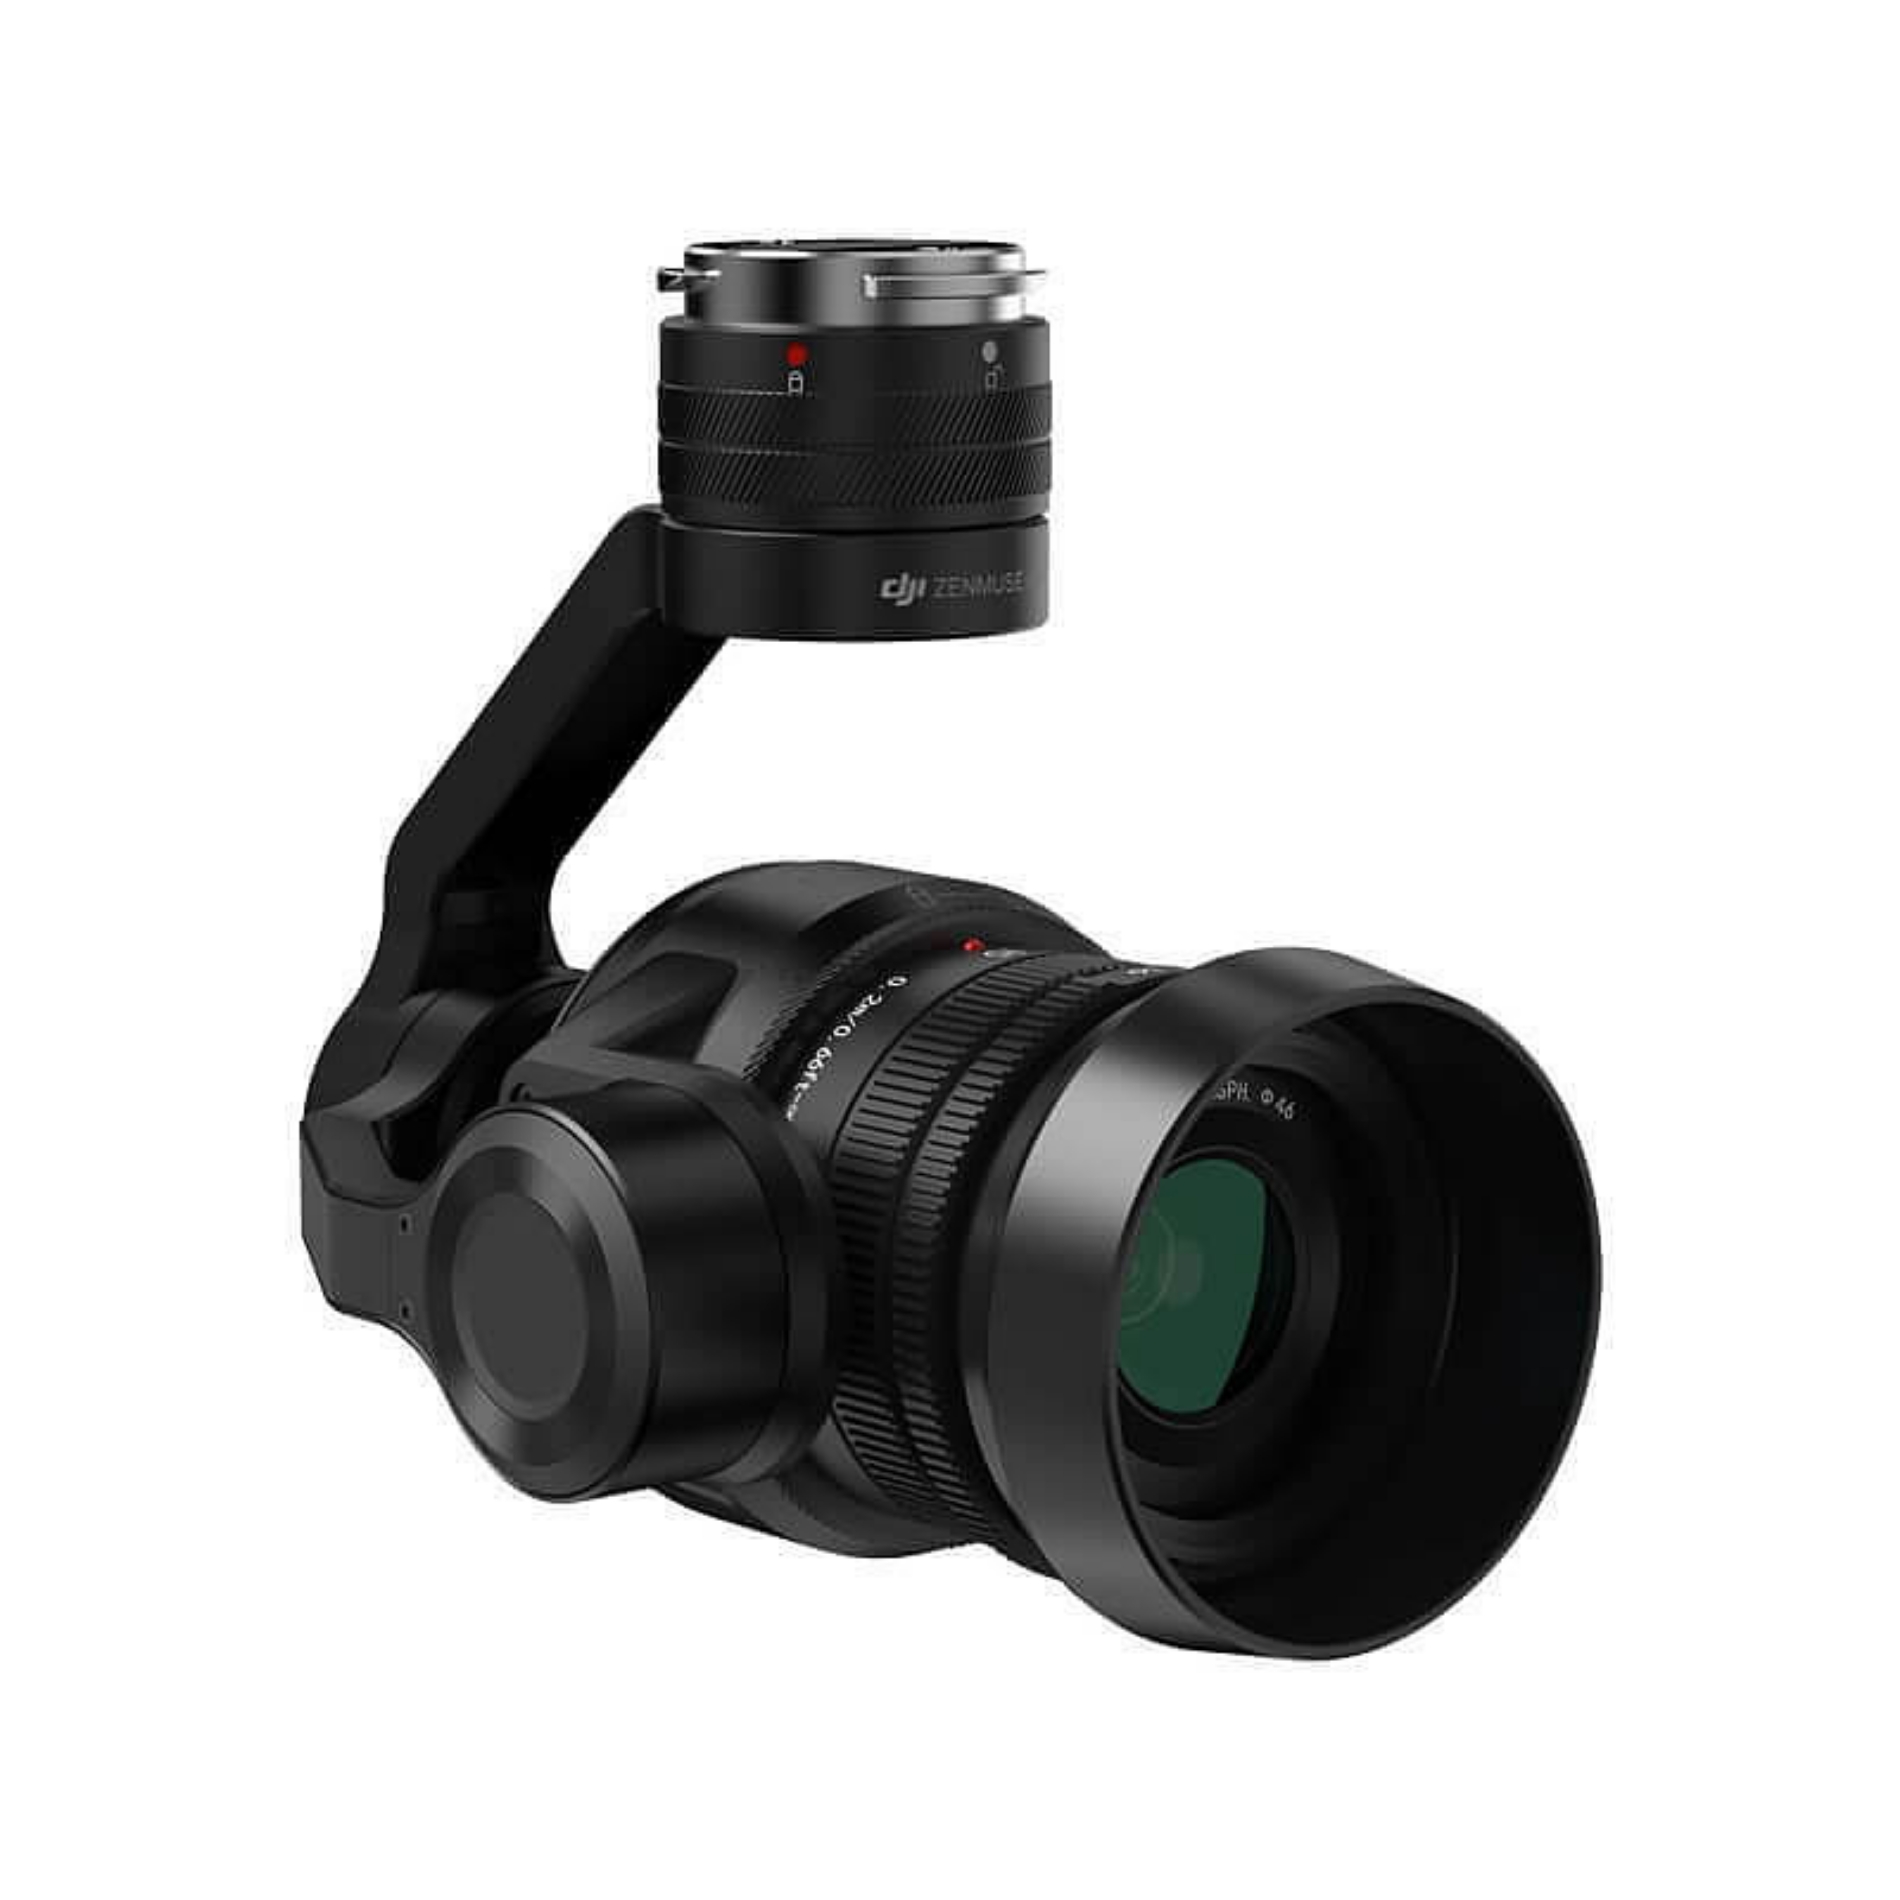 Picture of DJI Zenmuse X5S Aerial Camera